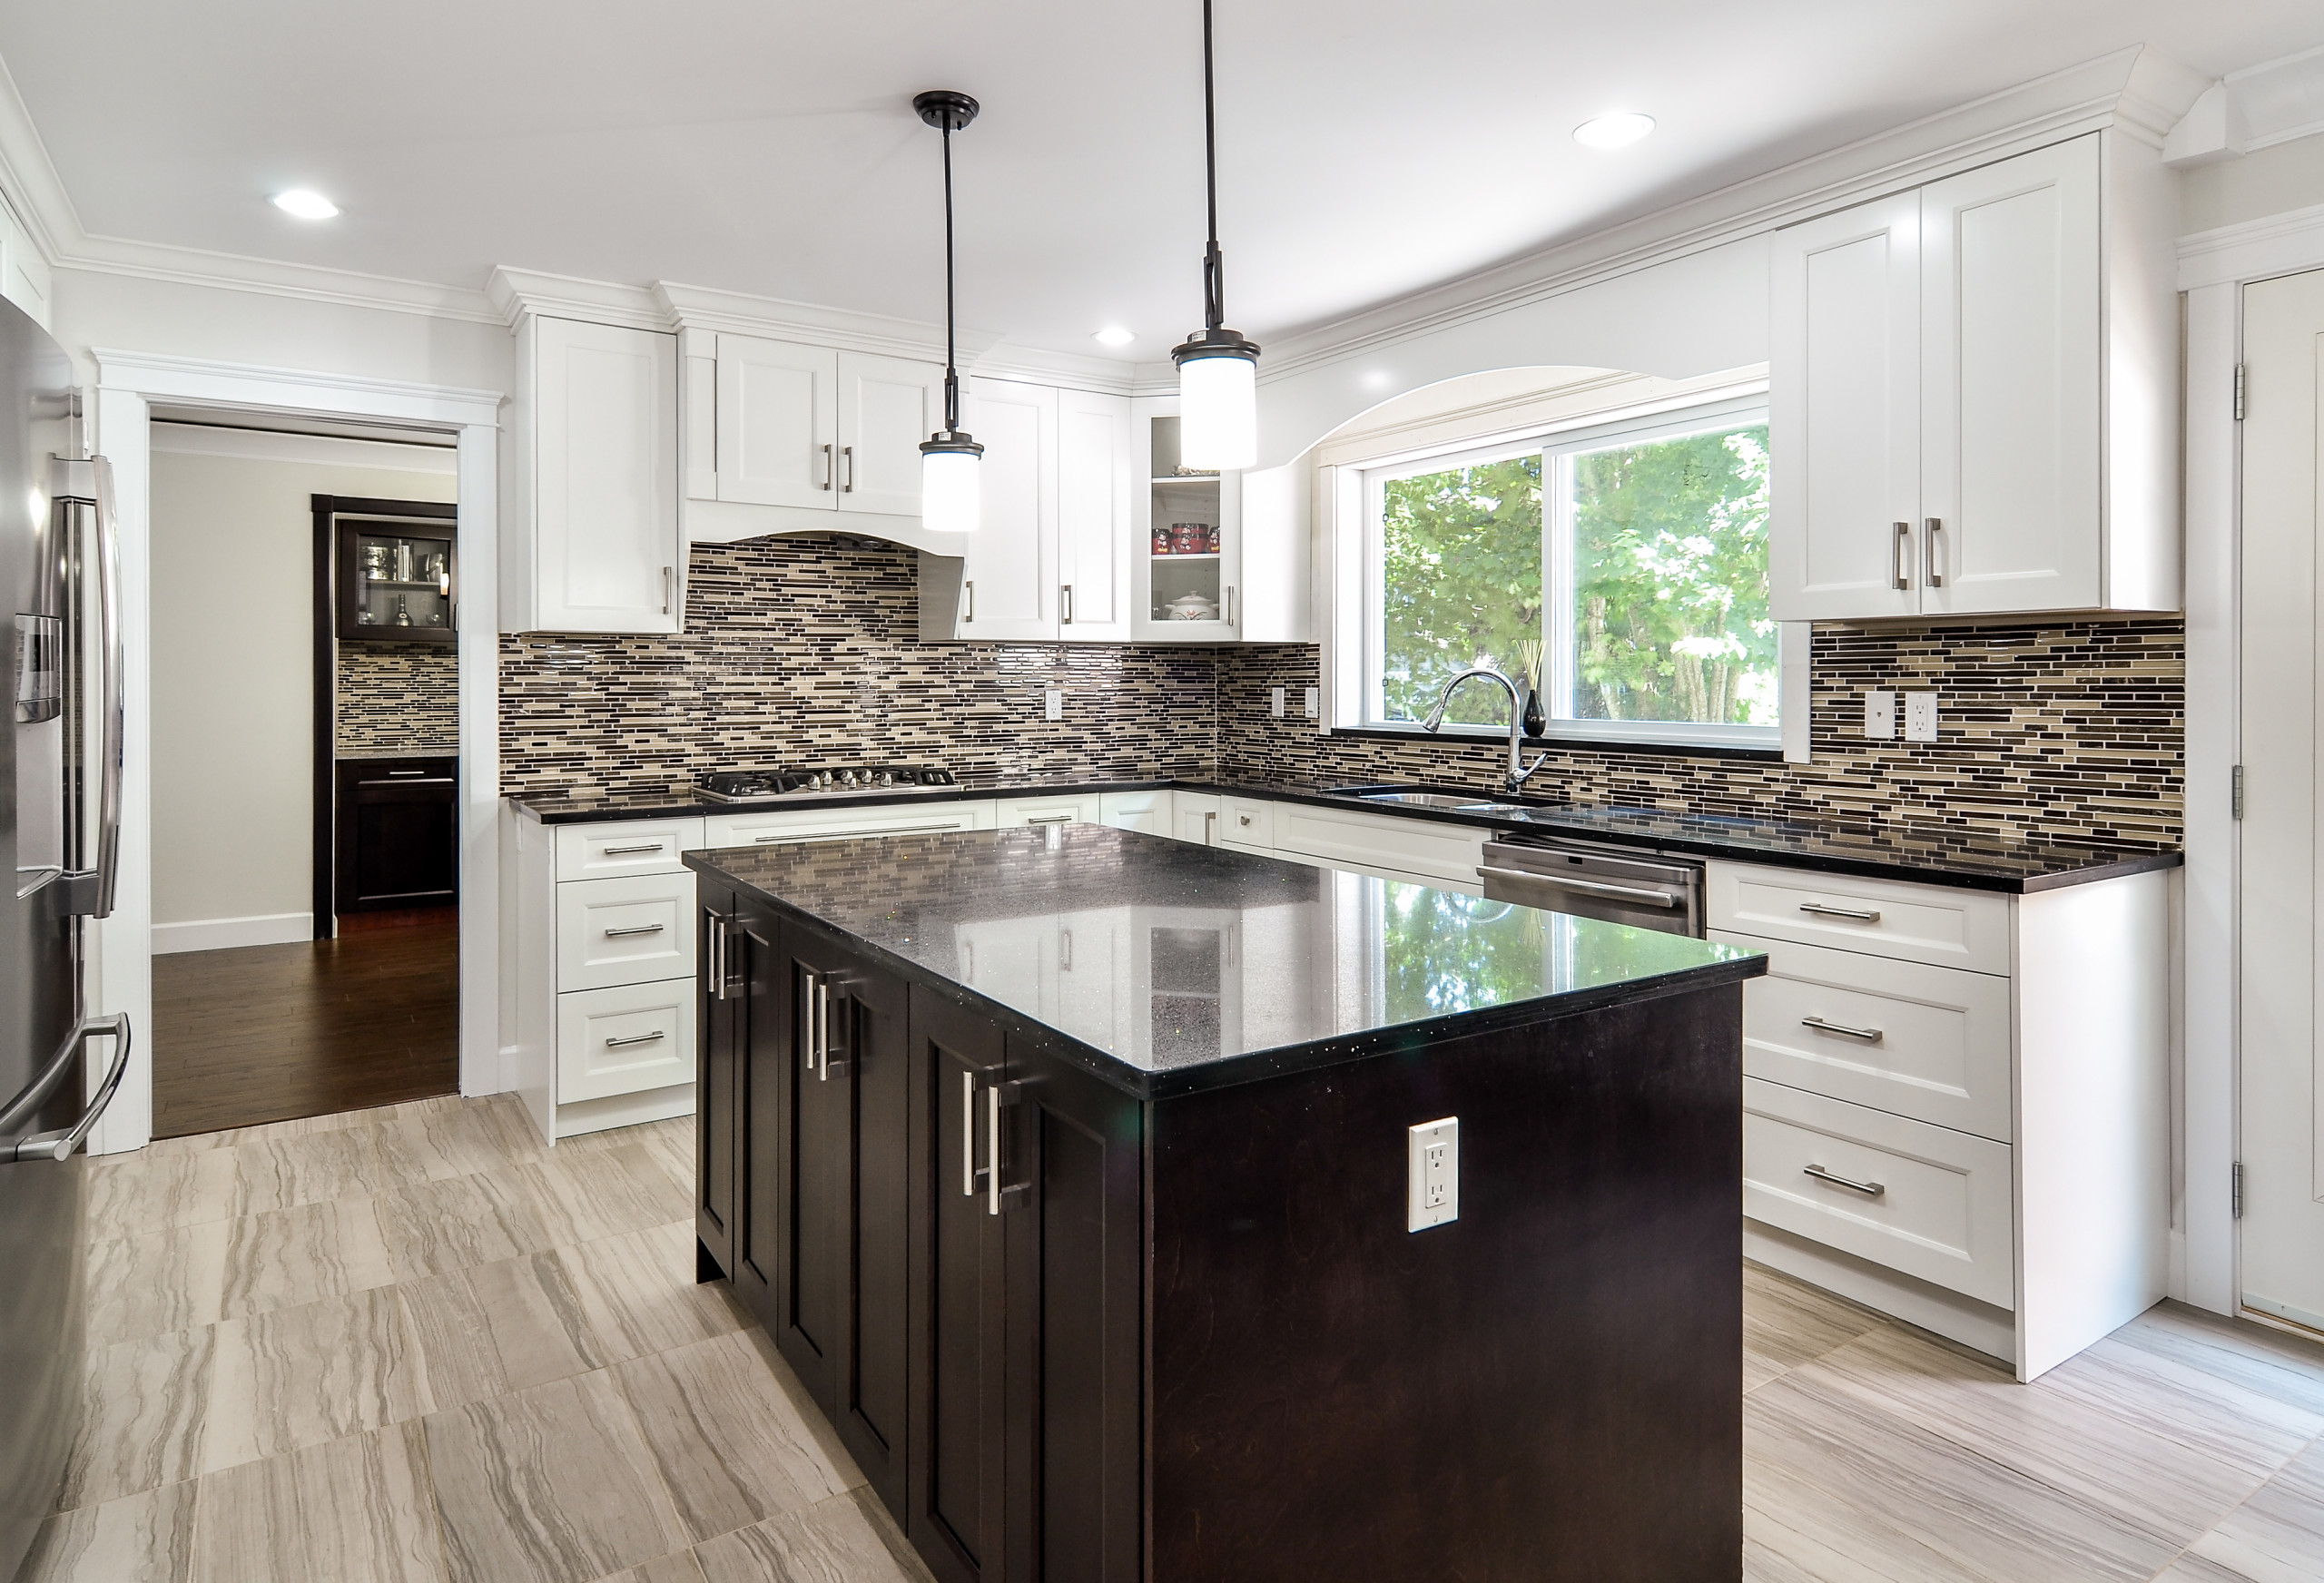 Contemporary Kitchen Island With Shaker Style Cabinets Vancouver Modern Kitchen Vancouver By Atlas Custom Cabinets Ltd Houzz